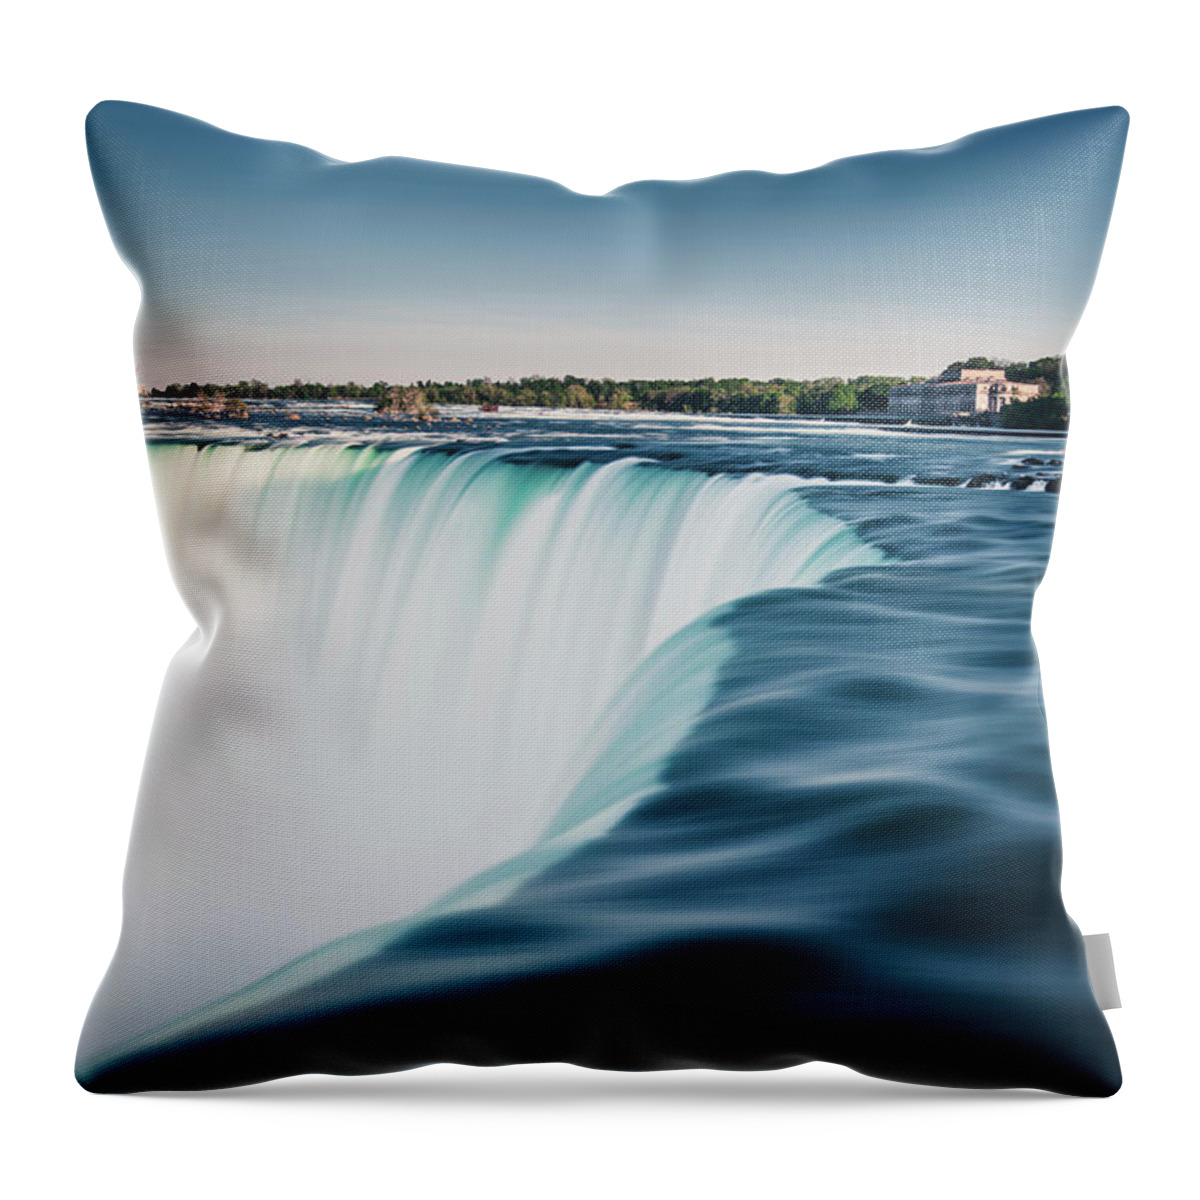 Scenics Throw Pillow featuring the photograph Long Exposure Of Niagara Falls In by D3sign